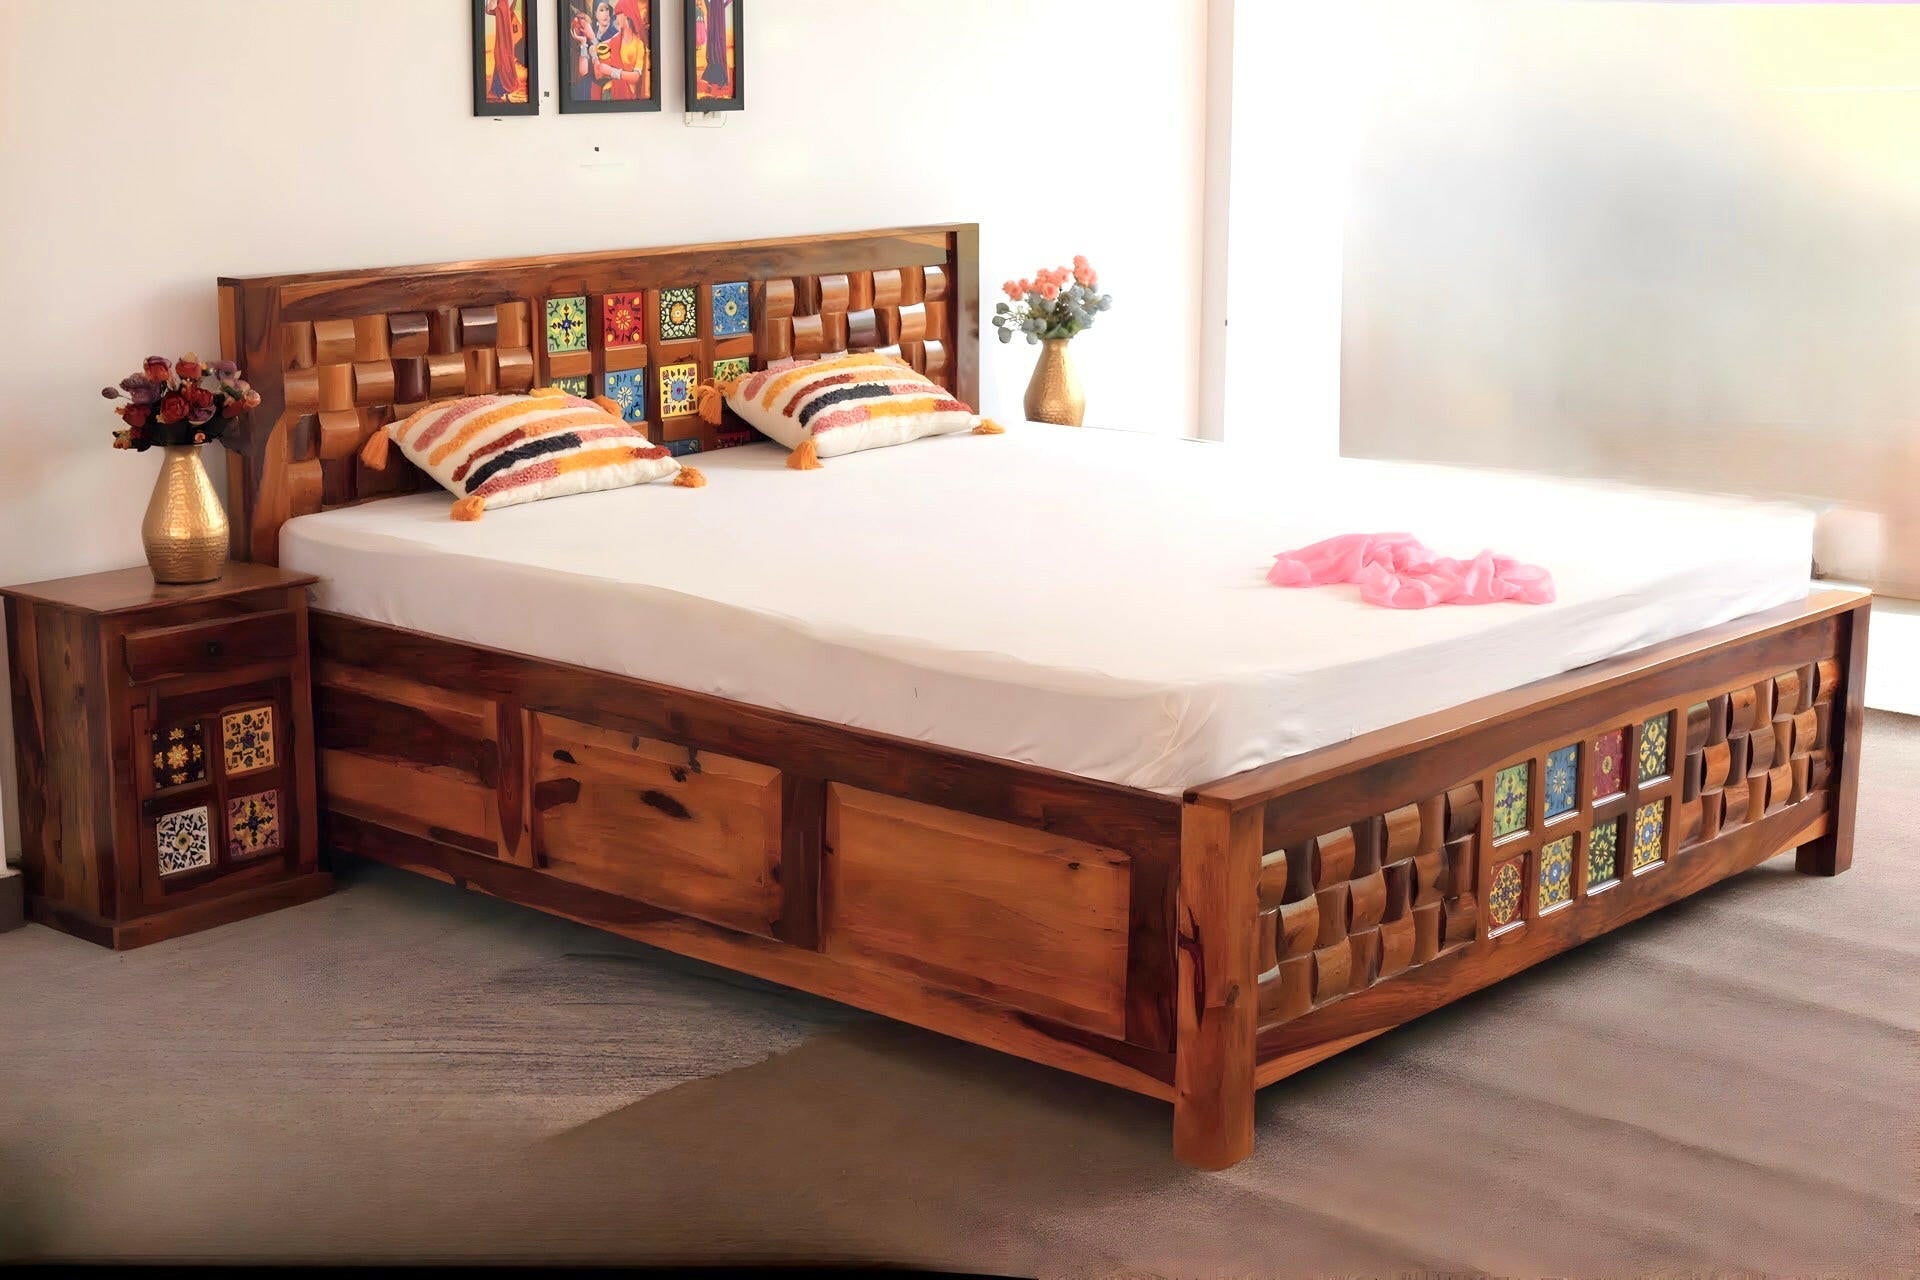 'Transform your bedroom with our exquisite collection of Tiles Plane Solid Wood Storage Bed, with traditional Rajasthani tile designs while experiencing true comfort in king or queen size variants.